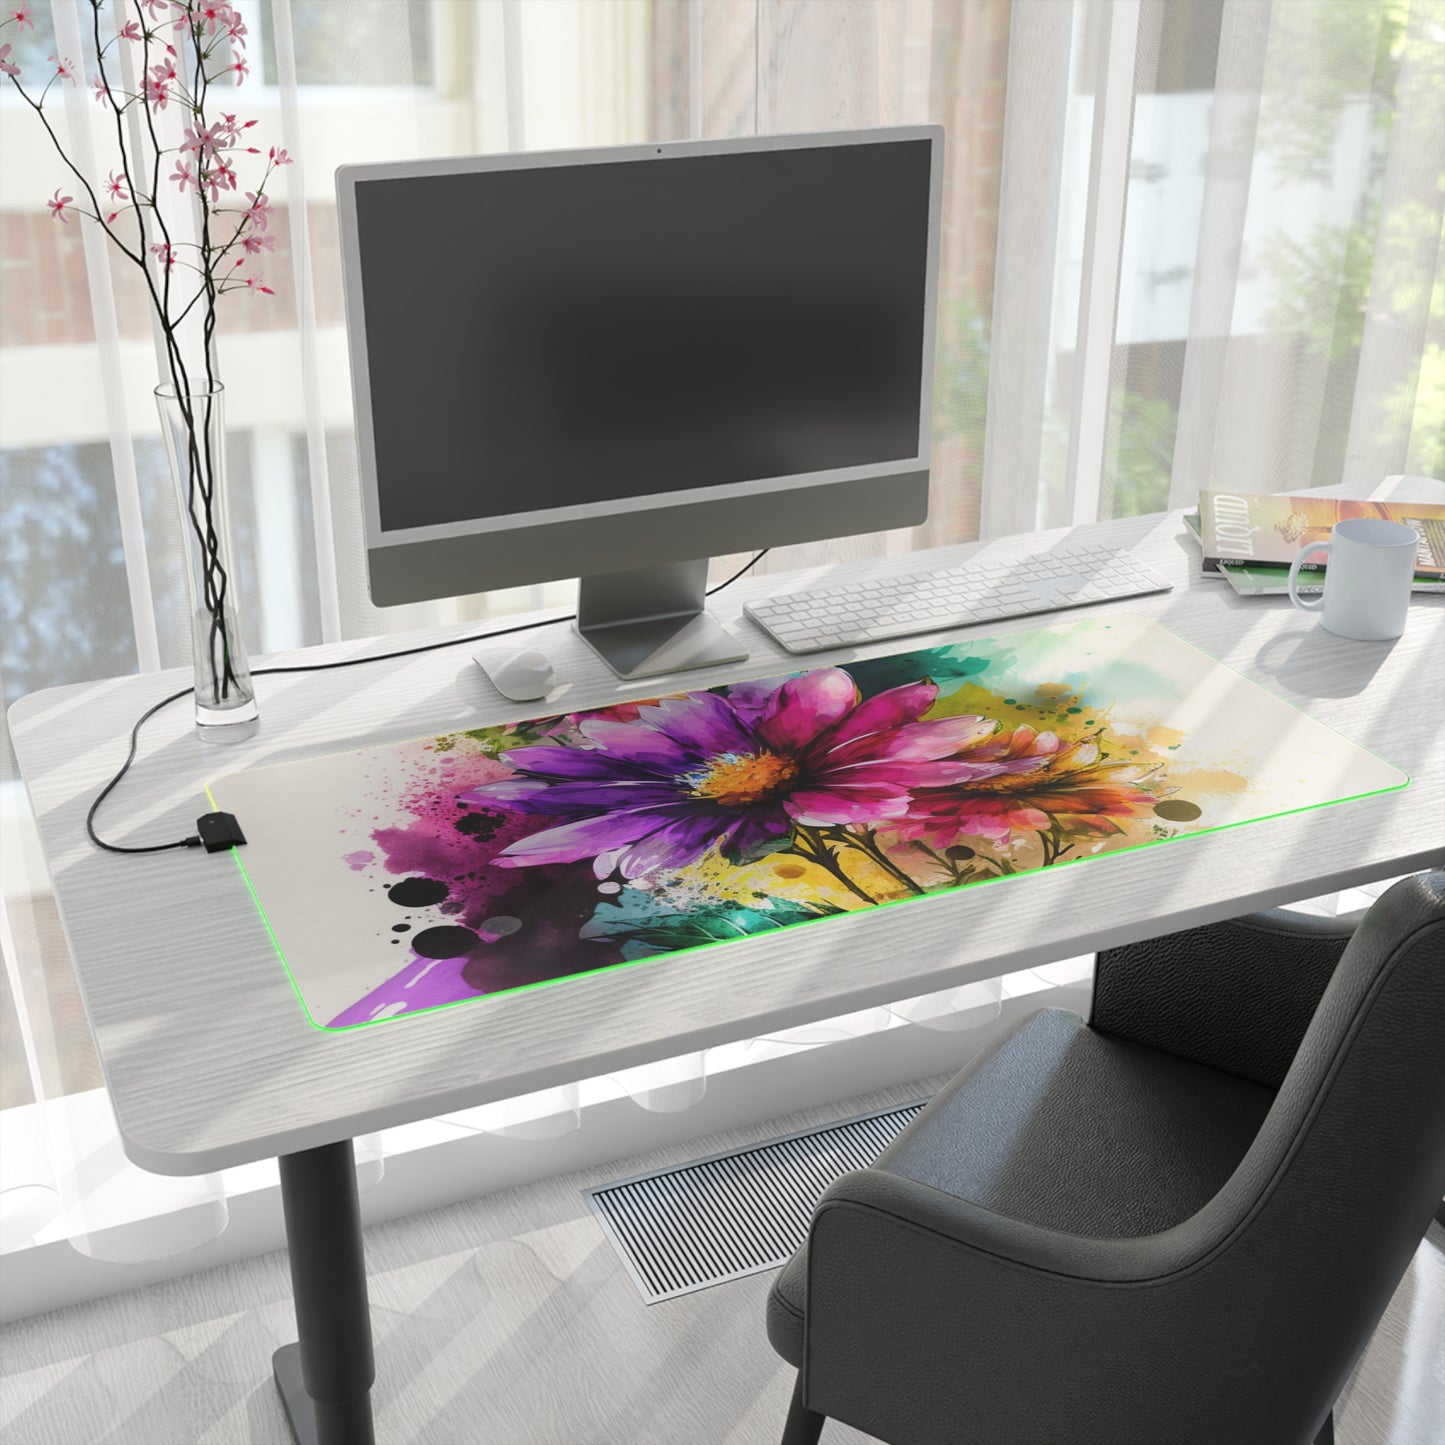 LED Gaming Mouse Pad Bright Spring Flowers 1